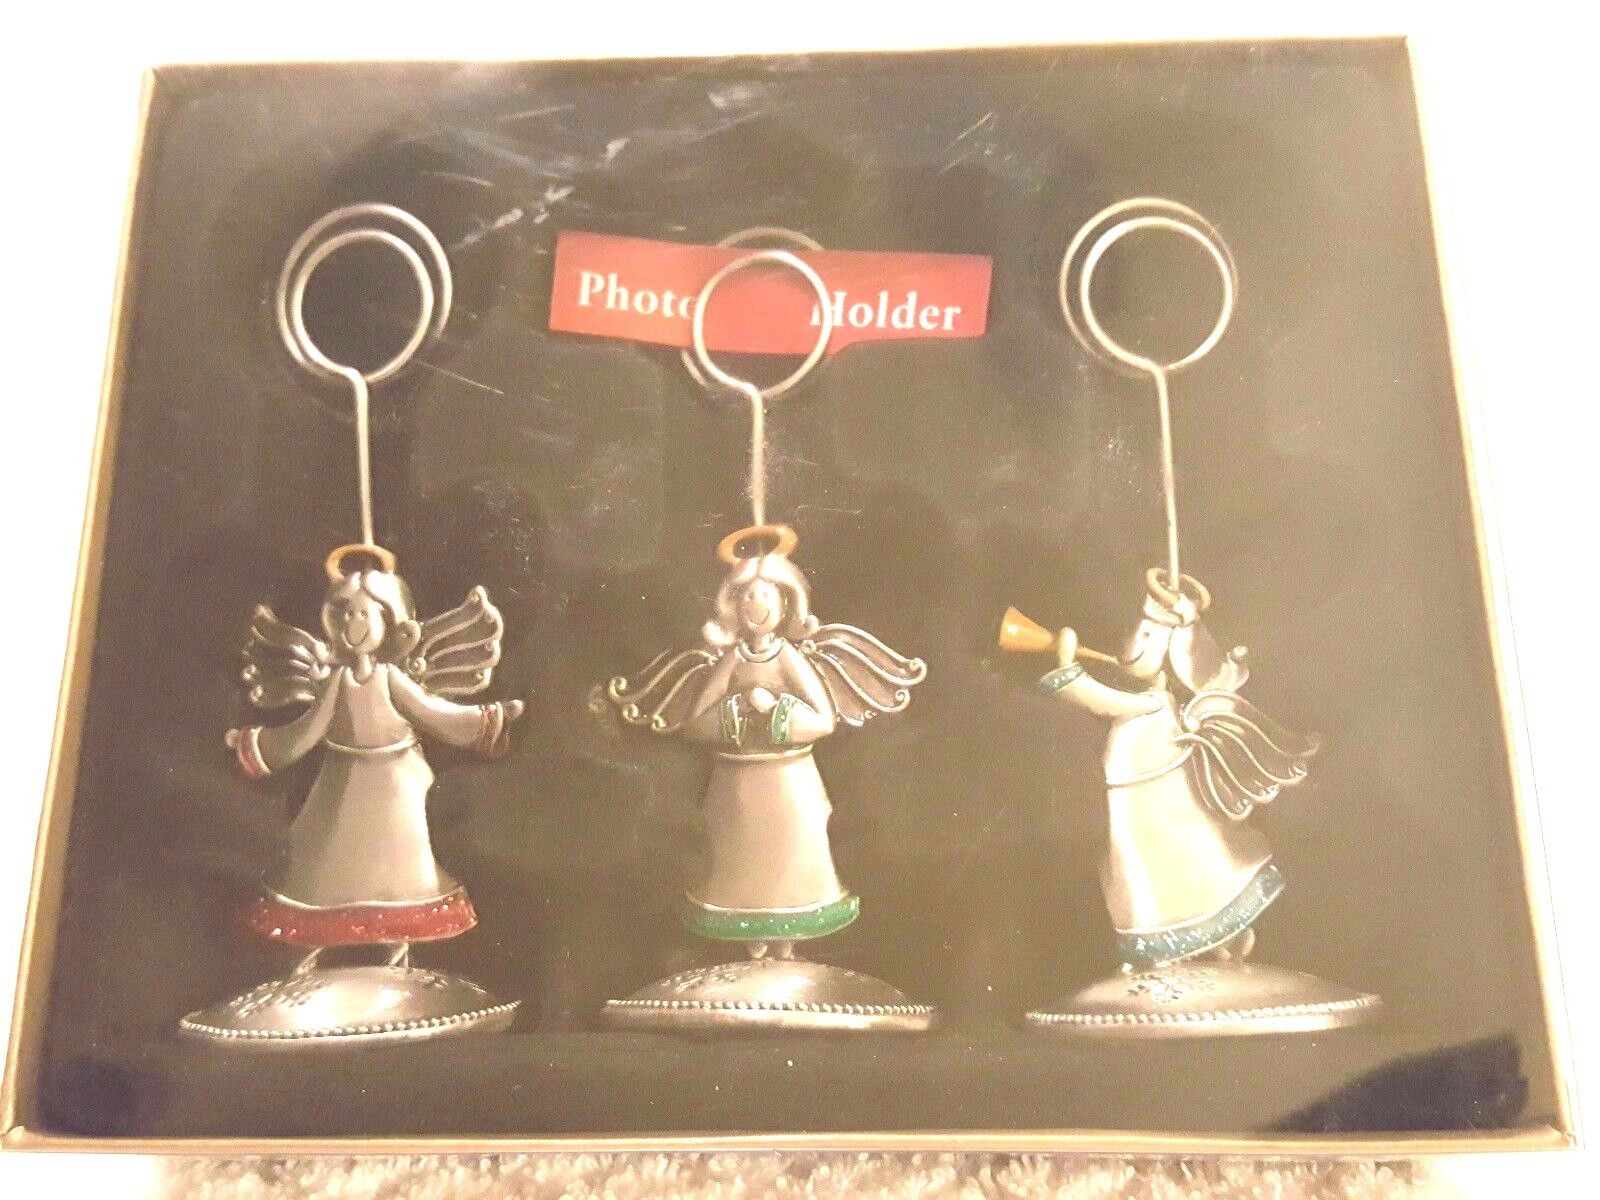 COLLECTIBLE ST. NICHOLAS SQUARE PEWTER ANGEL PHOTO CARD PLACE HOLDERS SET OF 3